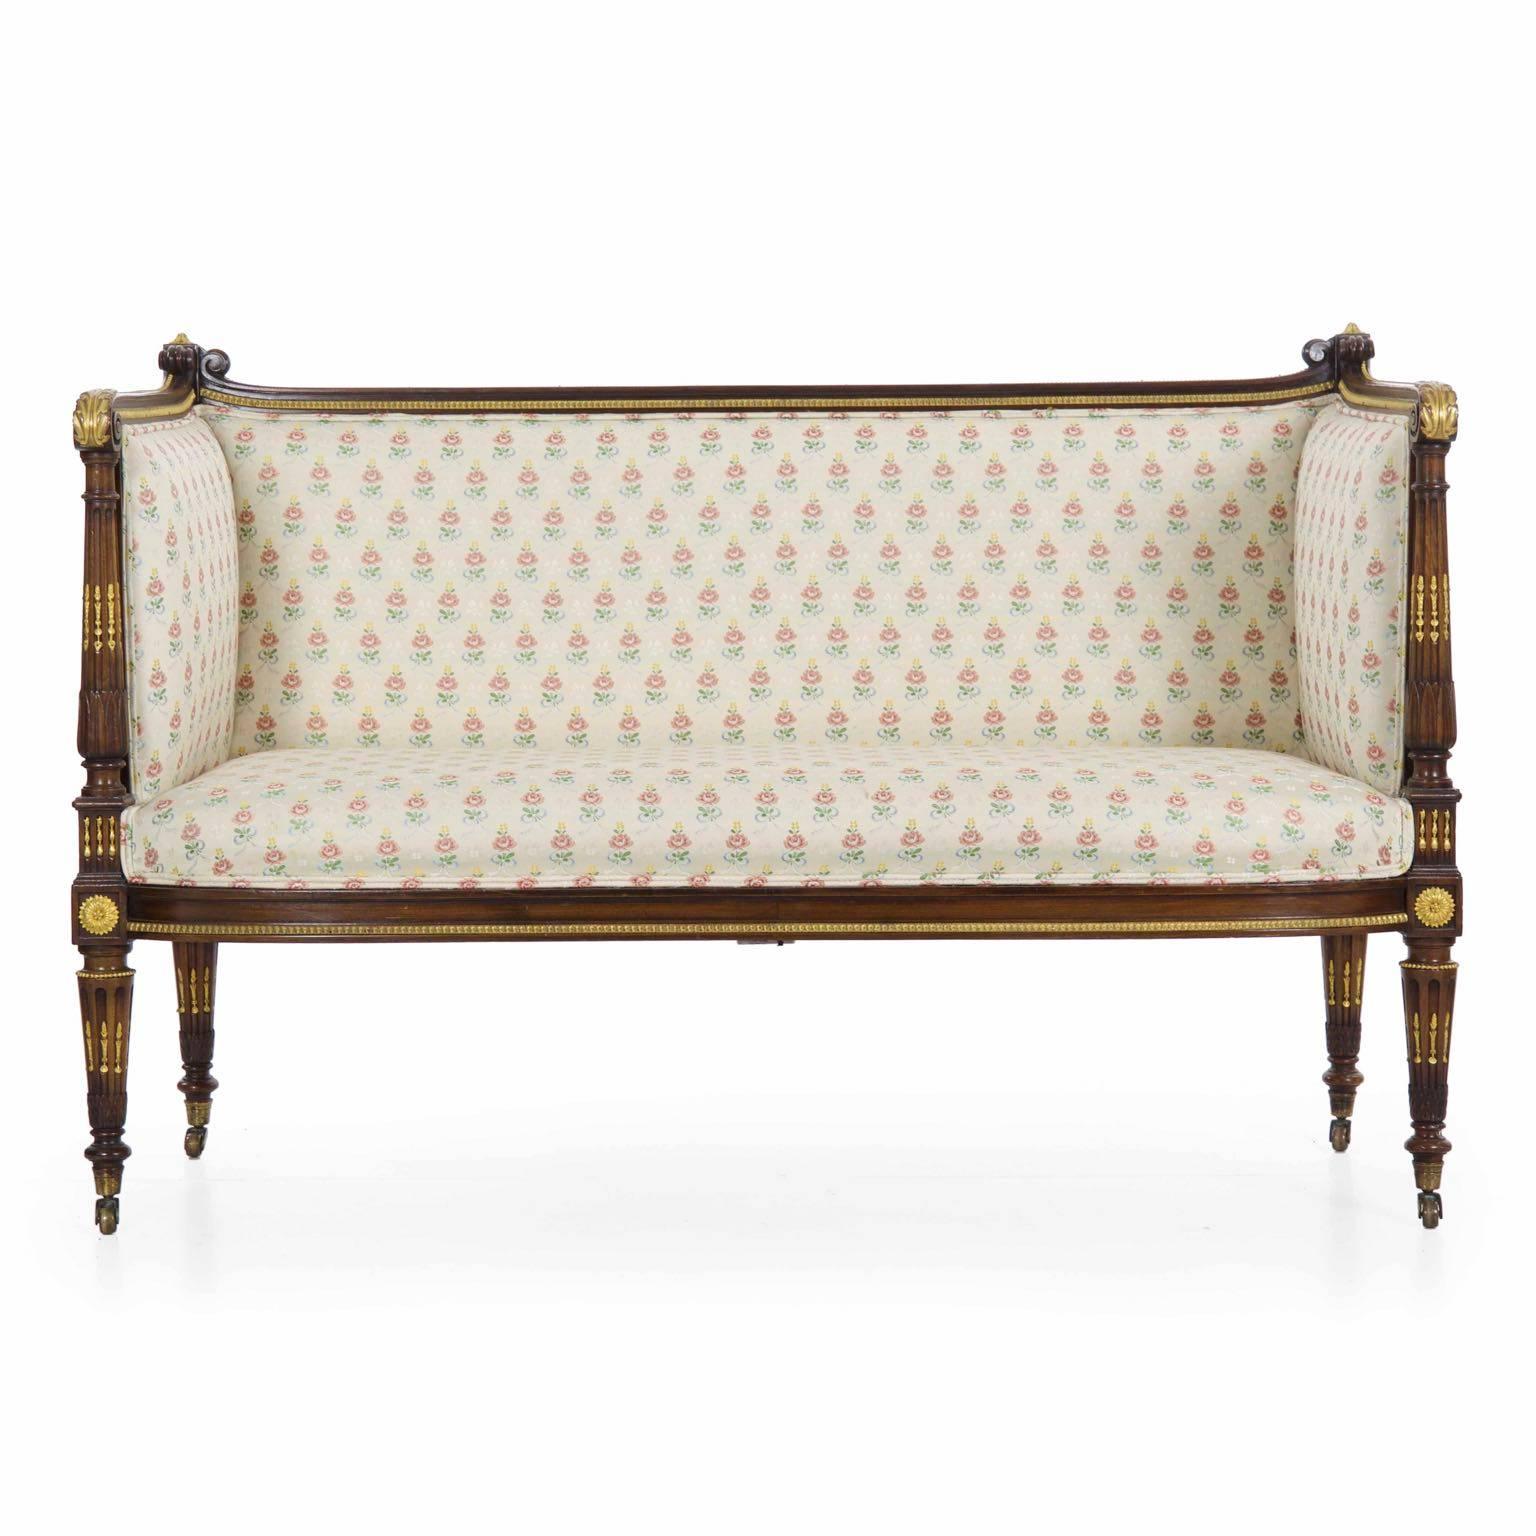 This is one of the most pleasing little canapé sofas we’ve brought into the shop in a while. Everything about it is nicely balanced - despite being incredibly well dressed in some of the finest gilt bronze mounts, the slight proportions and totality